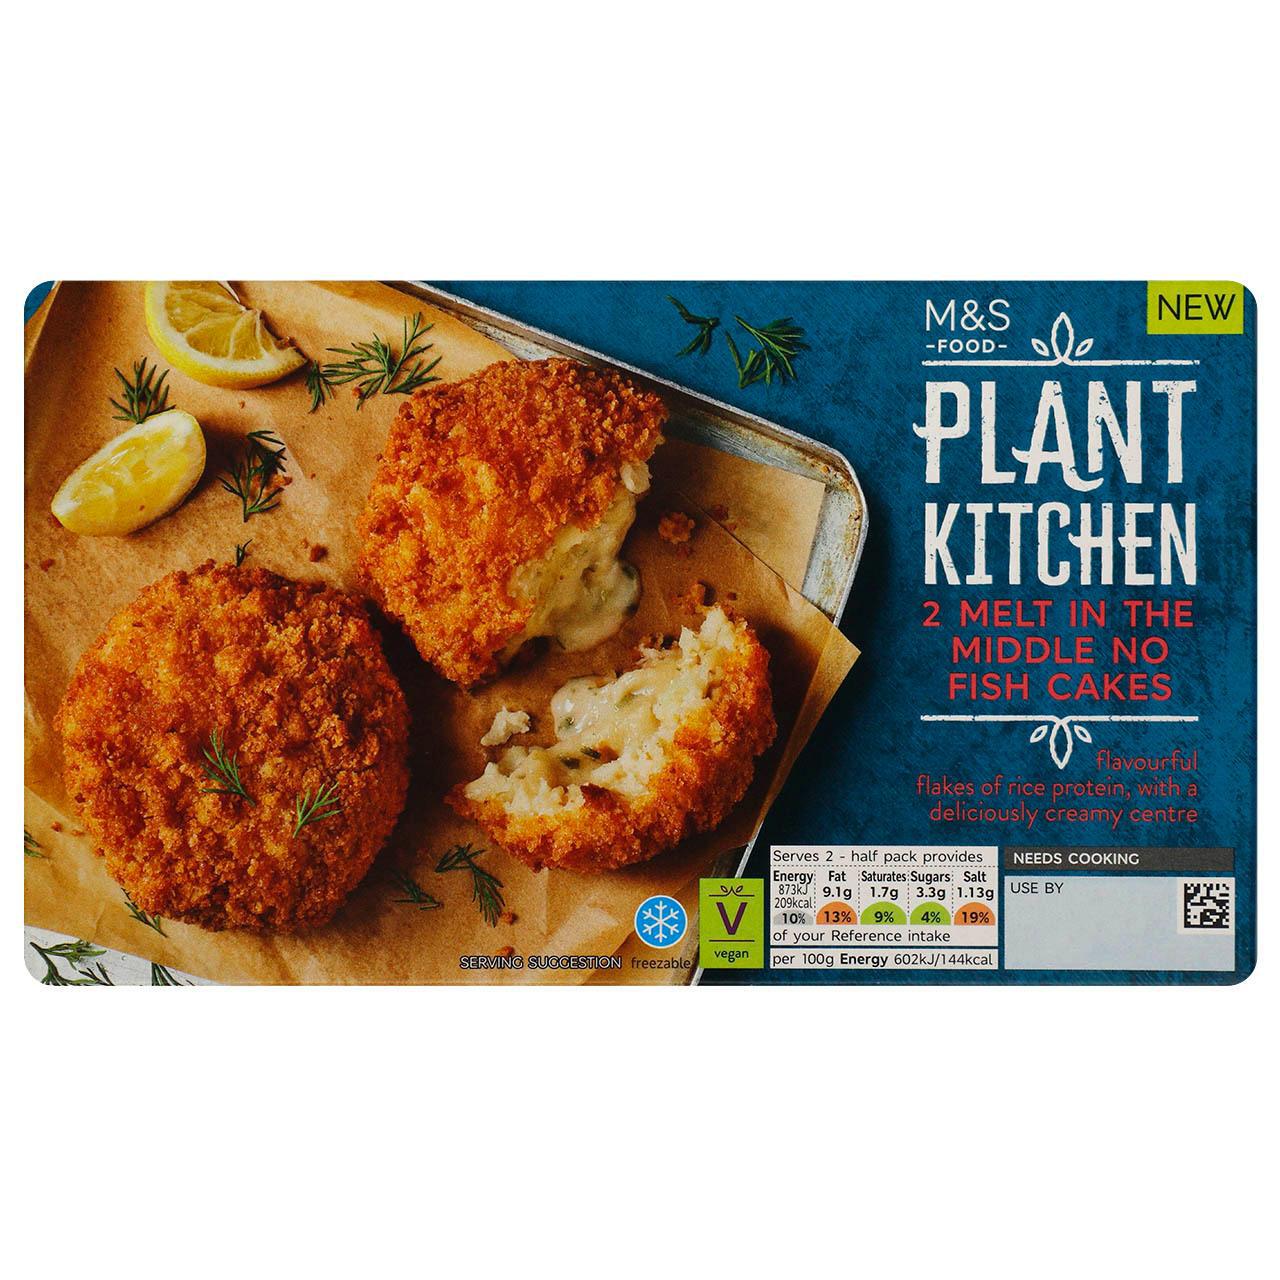 M&S Plant Kitchen 2 Melt in the Middle No Fish Cakes 290g